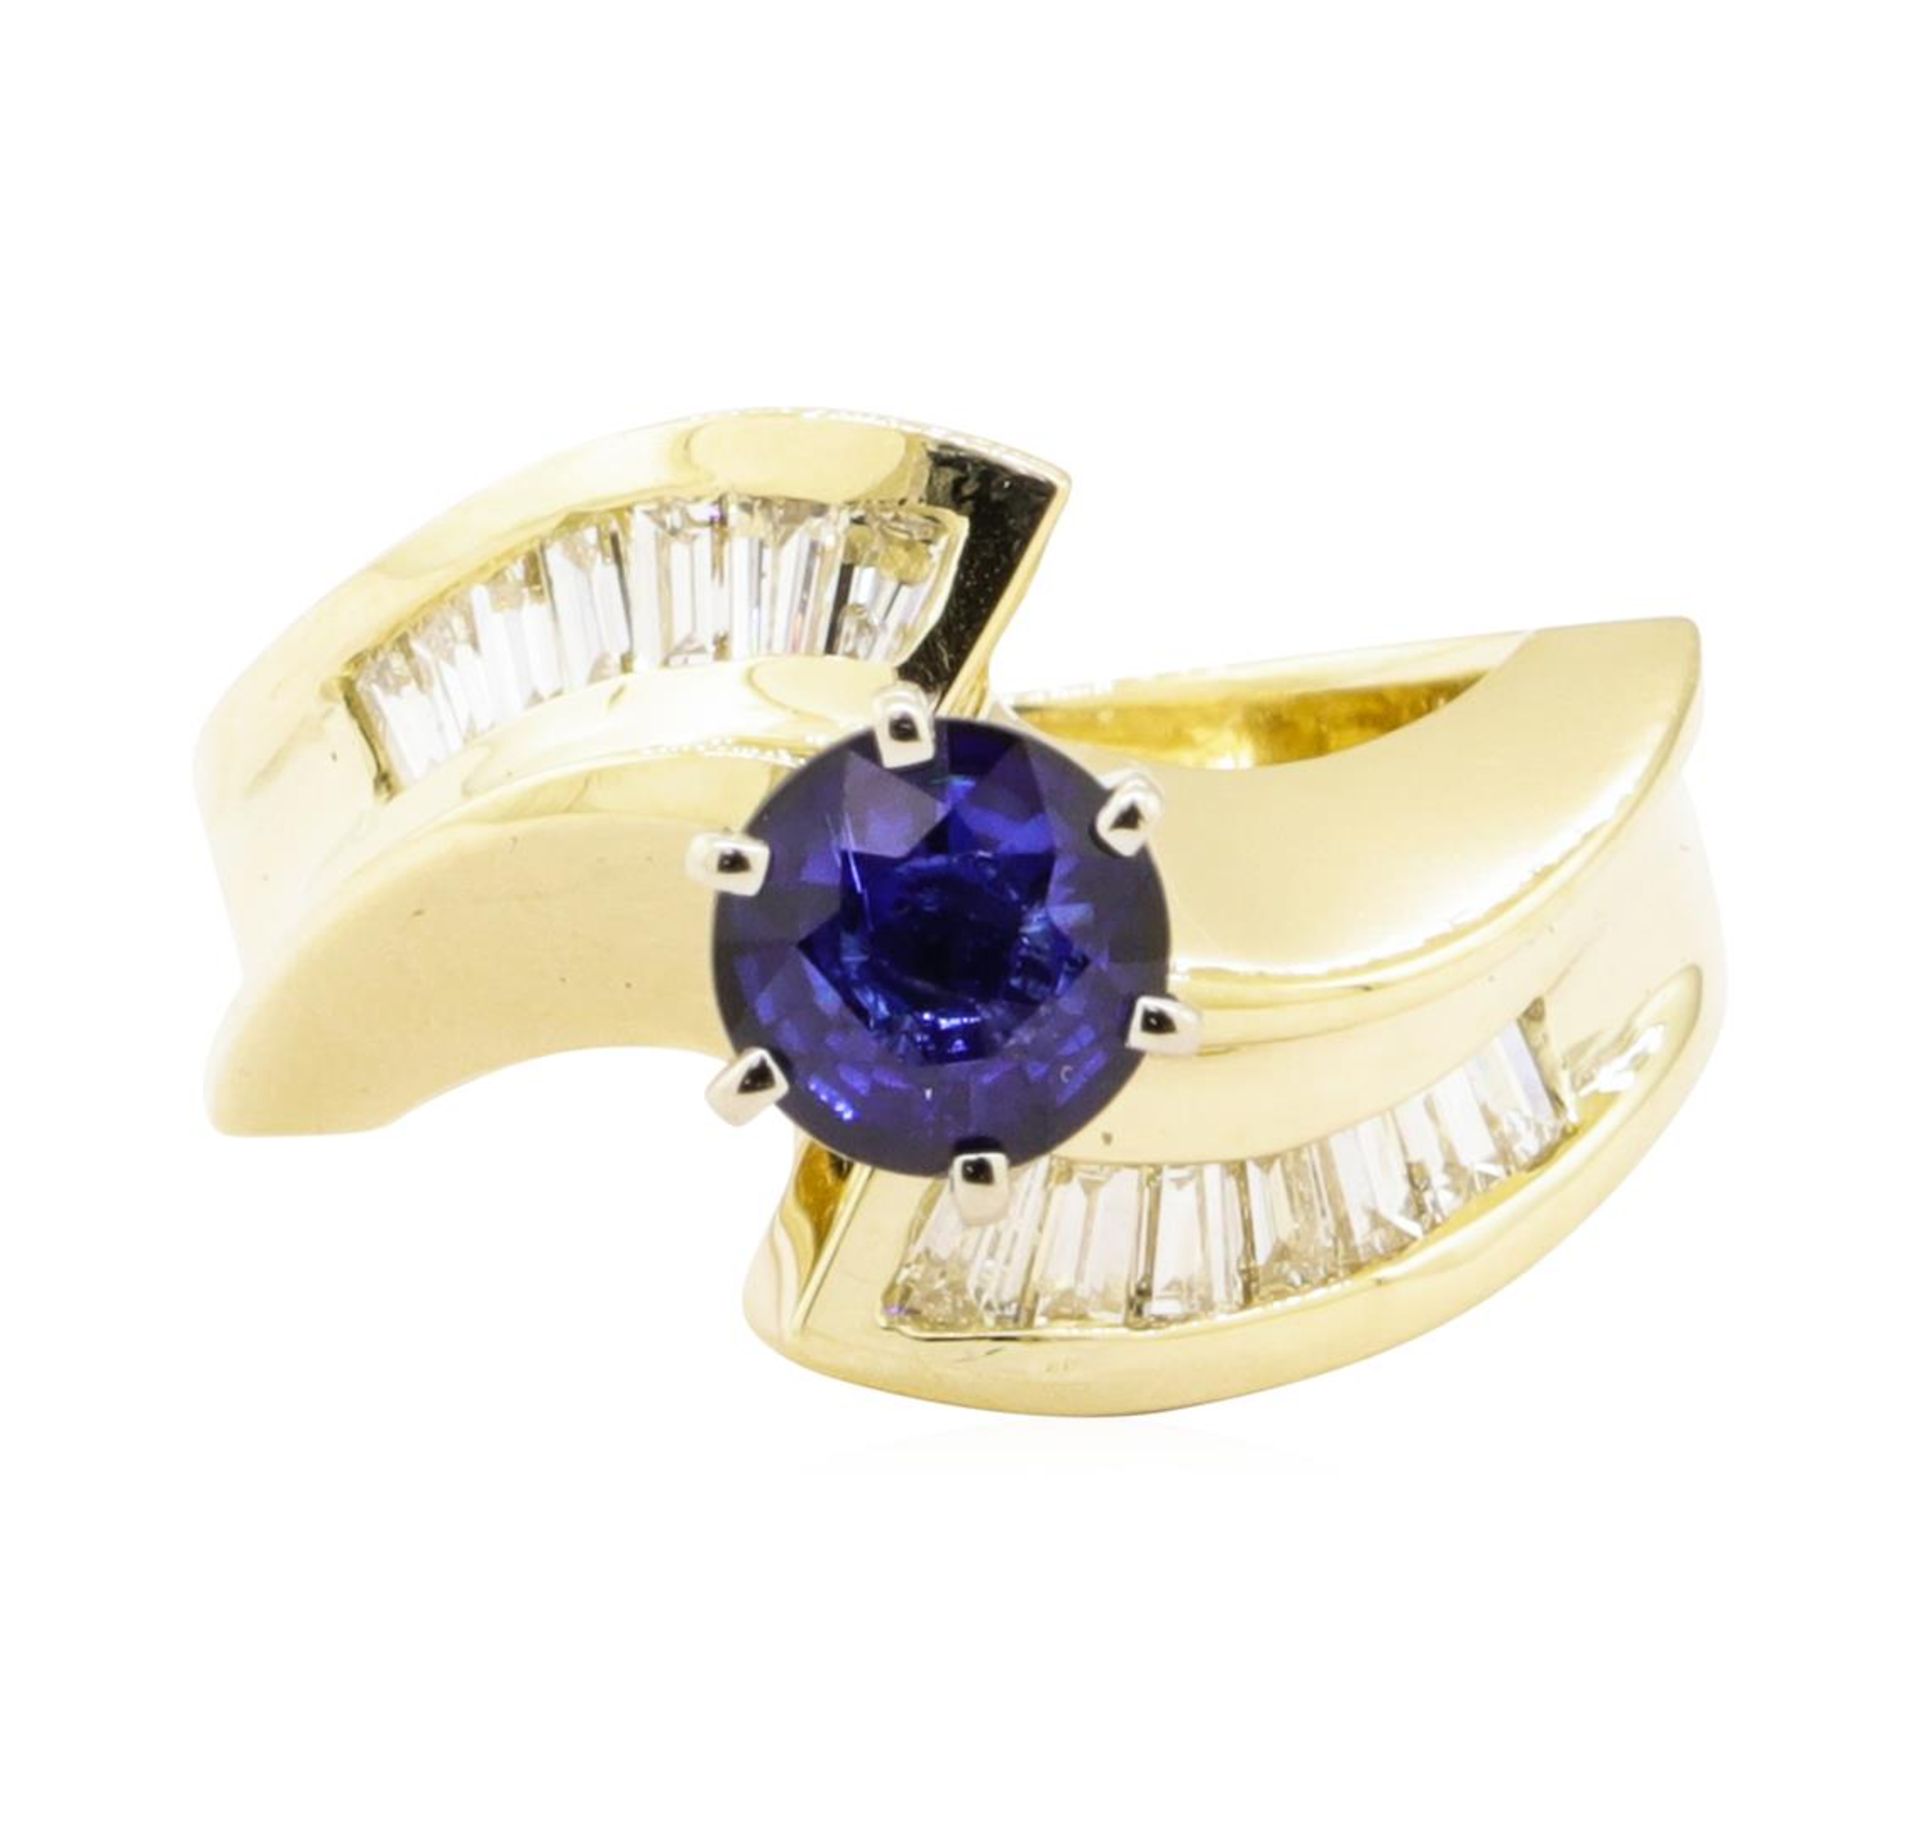 1.51 ctw Blue Sapphire And Diamond Ring - 14KT Yellow Gold - Image 2 of 5